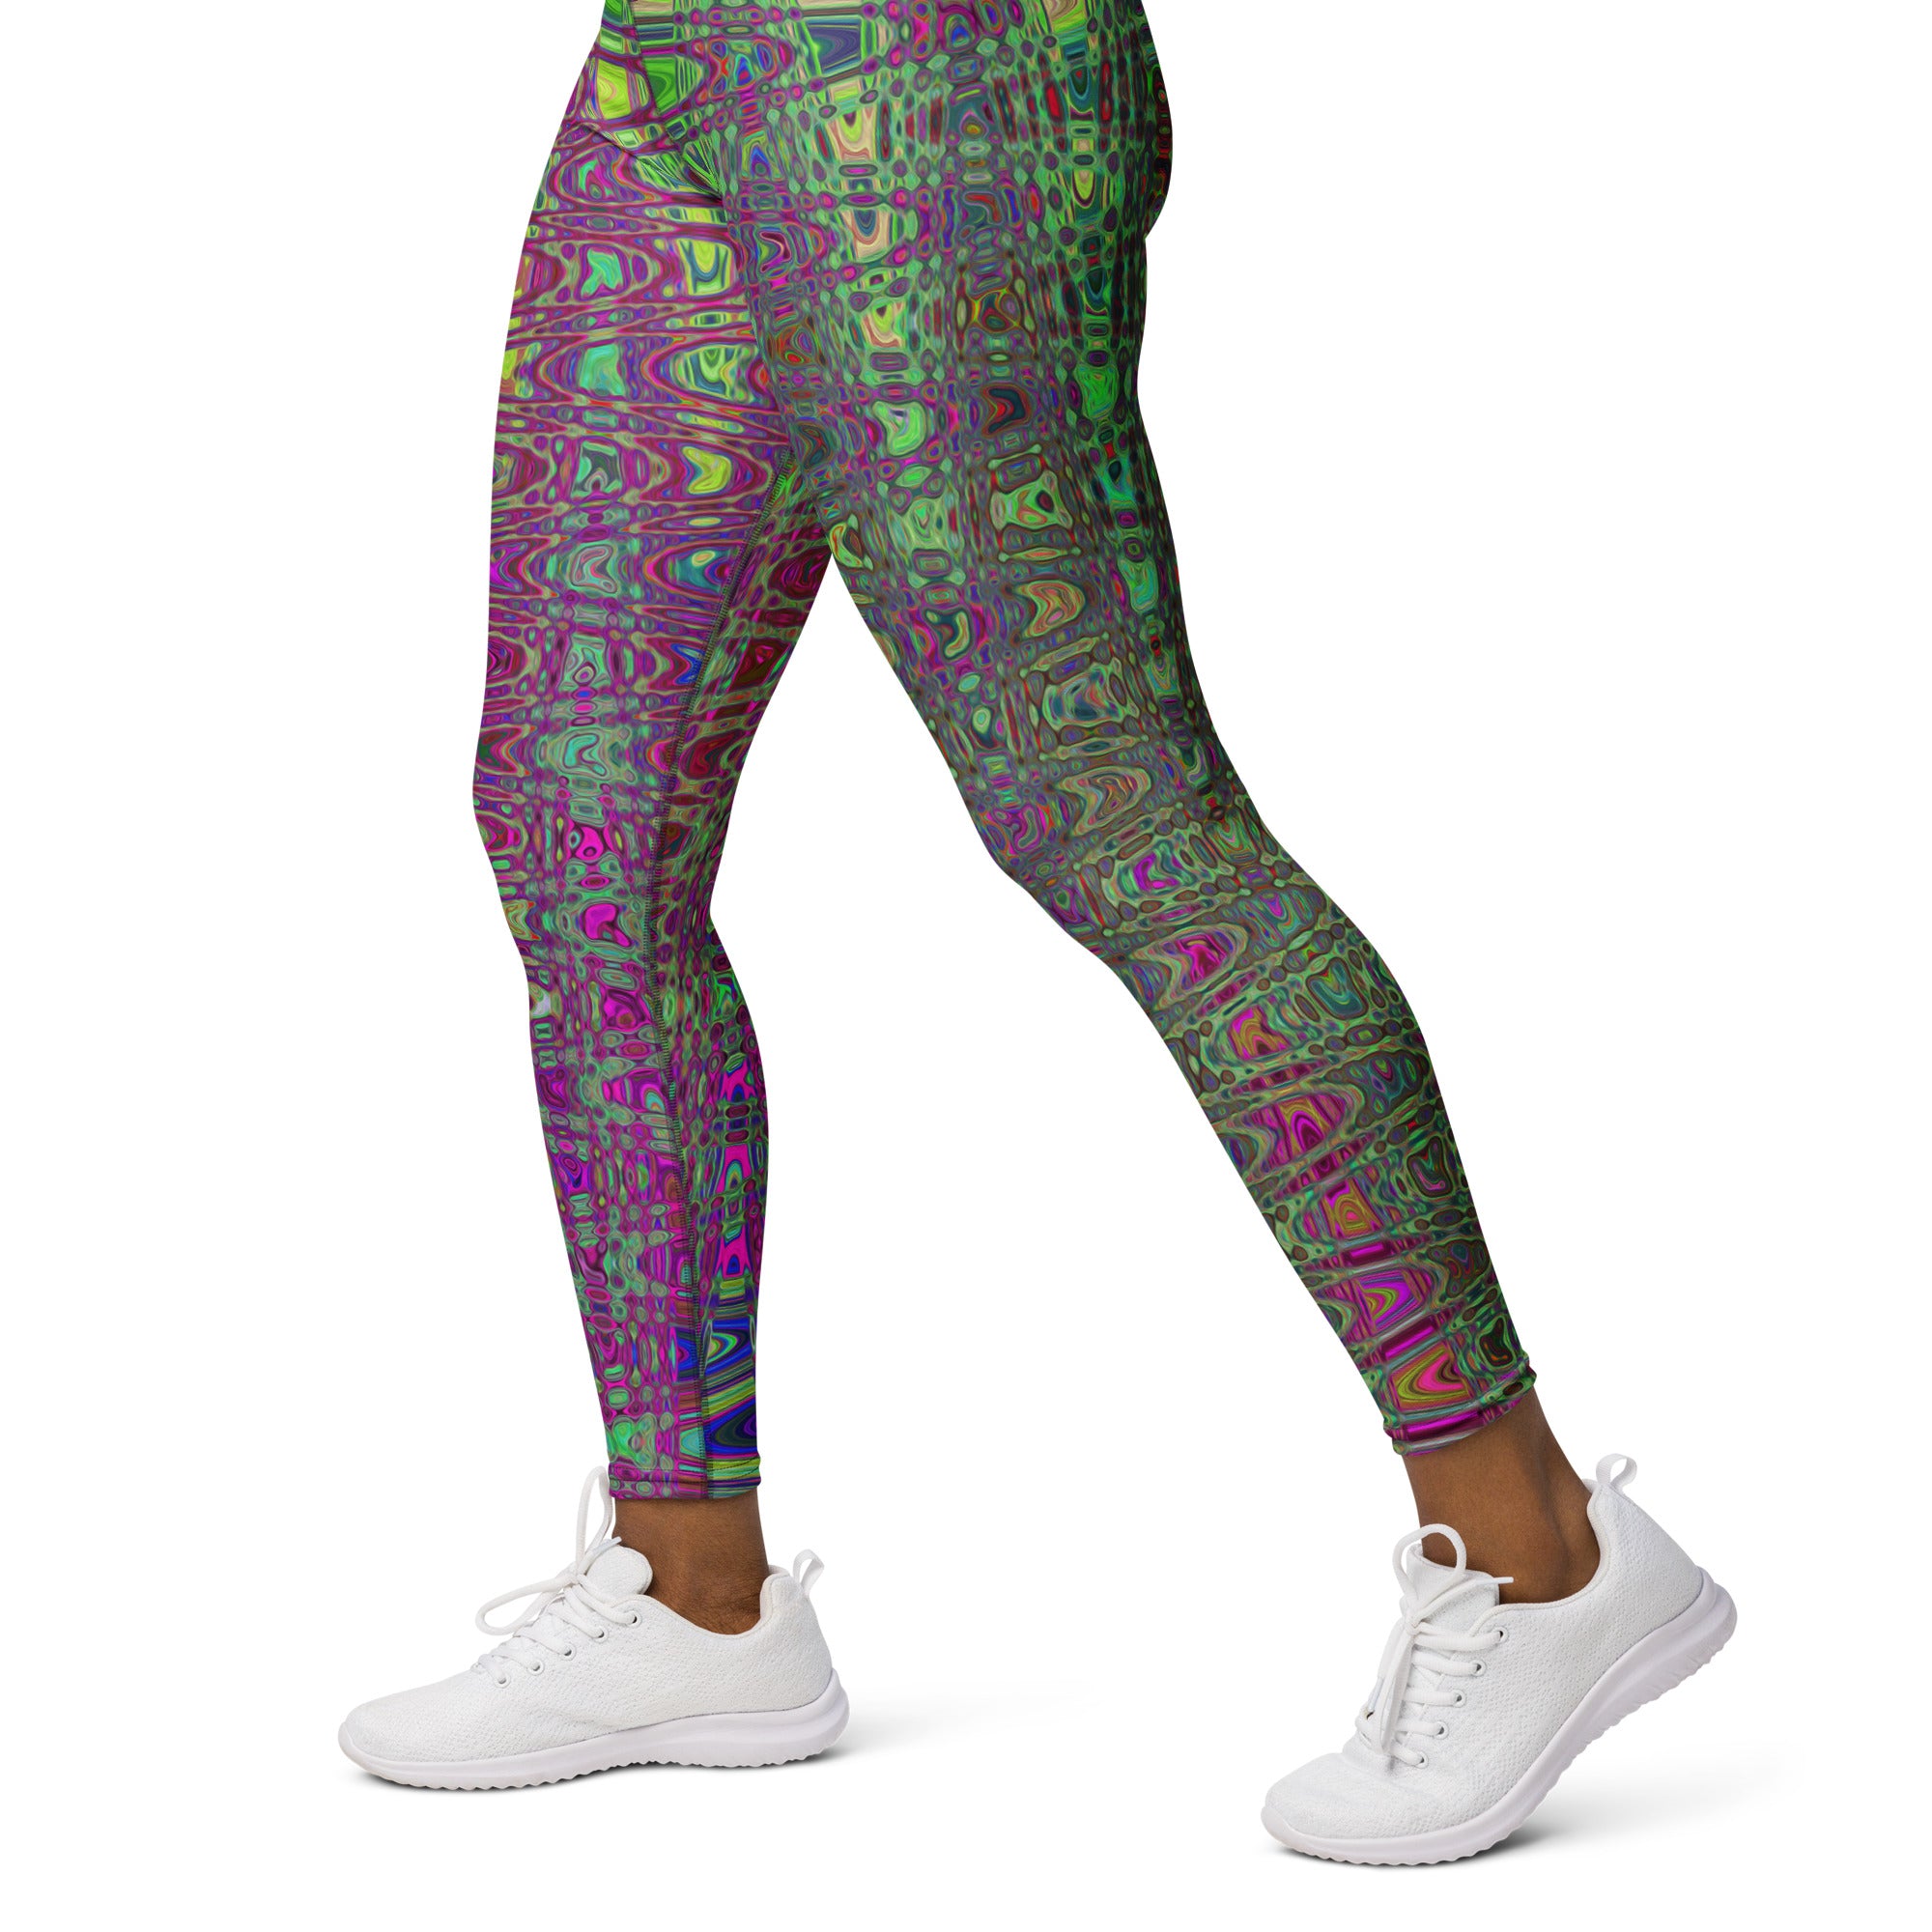 Yoga Leggings for Women | Abstract Purple and Green Retro Boomerang Waves